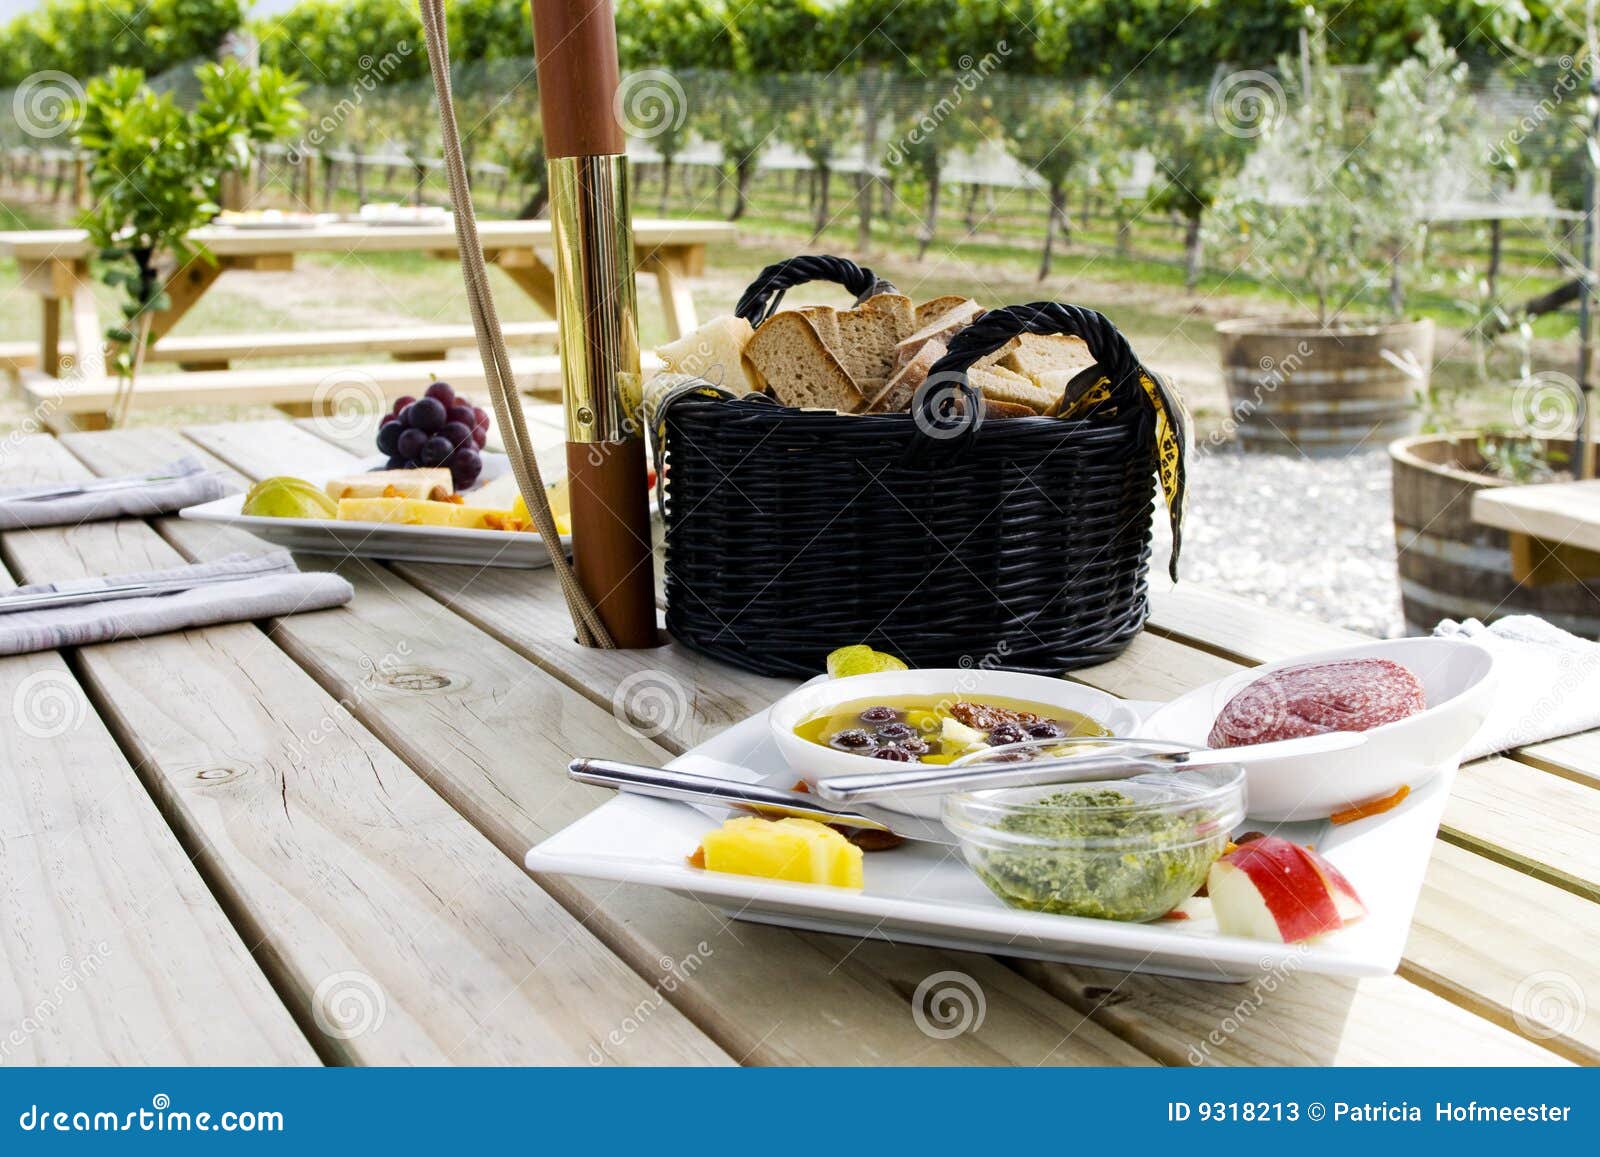 Picnic in vineyard with bread, olives and sausage.